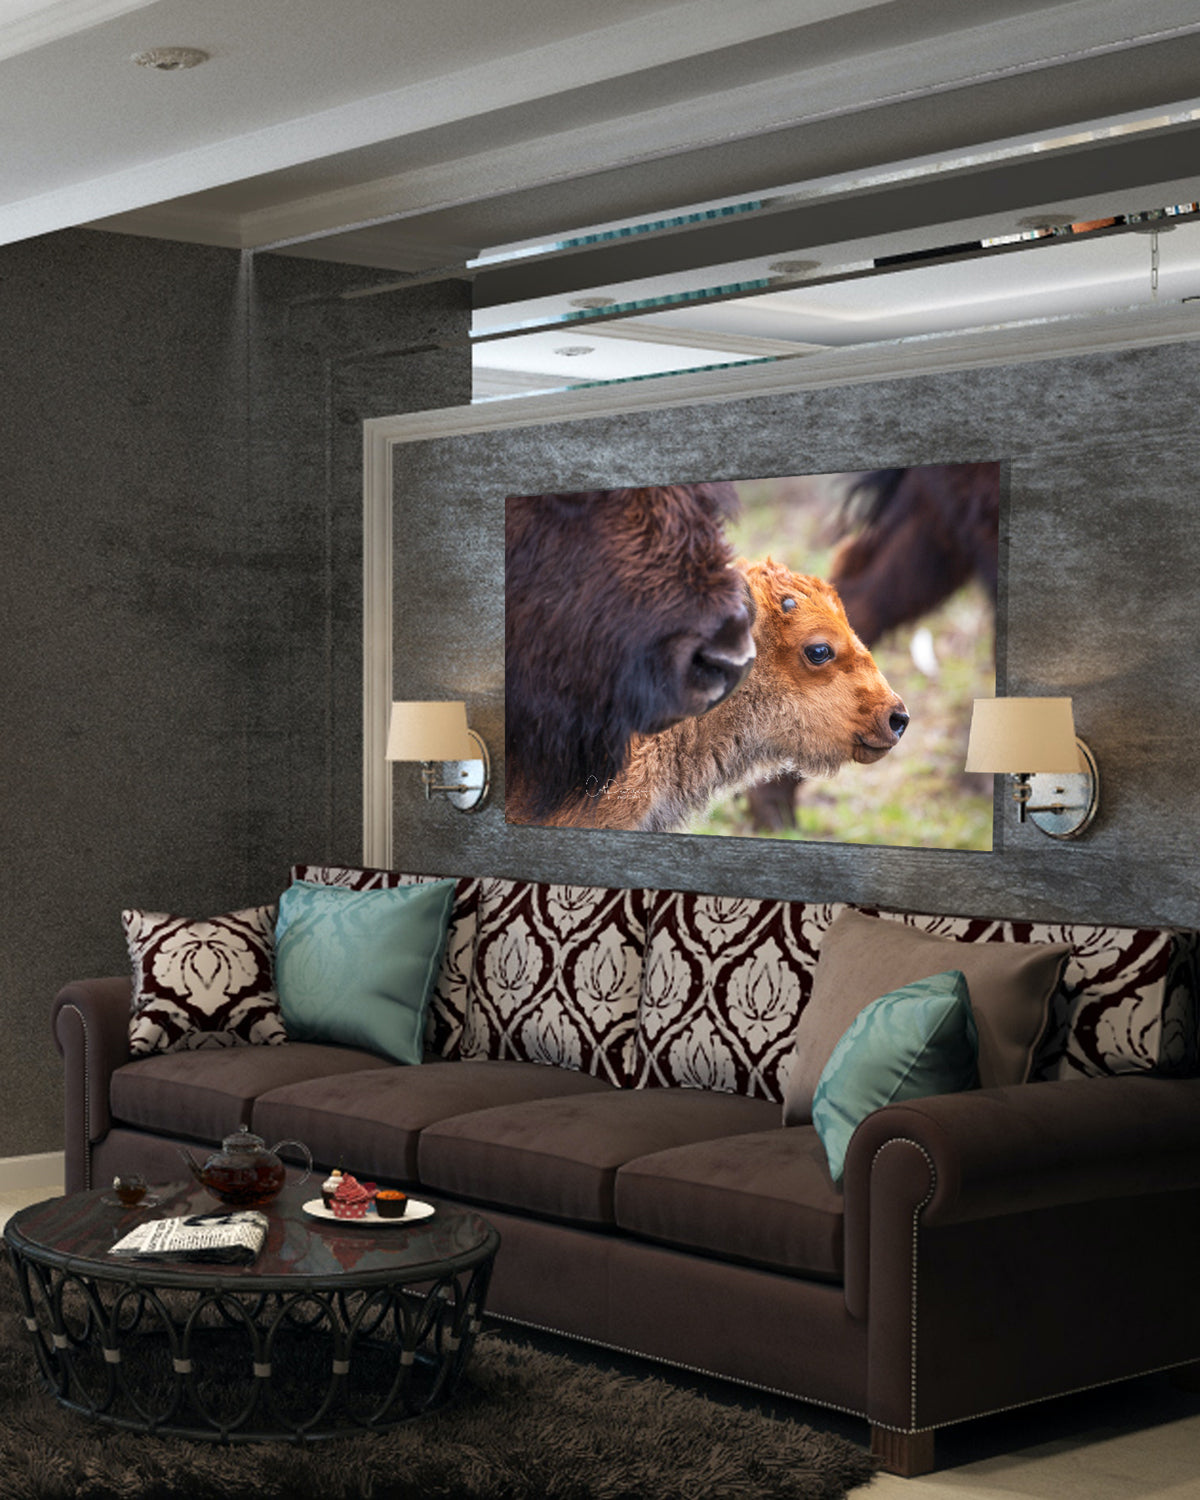 Buffalo bison red dog newborn calf focused on its future with mom by its side on living room wall.